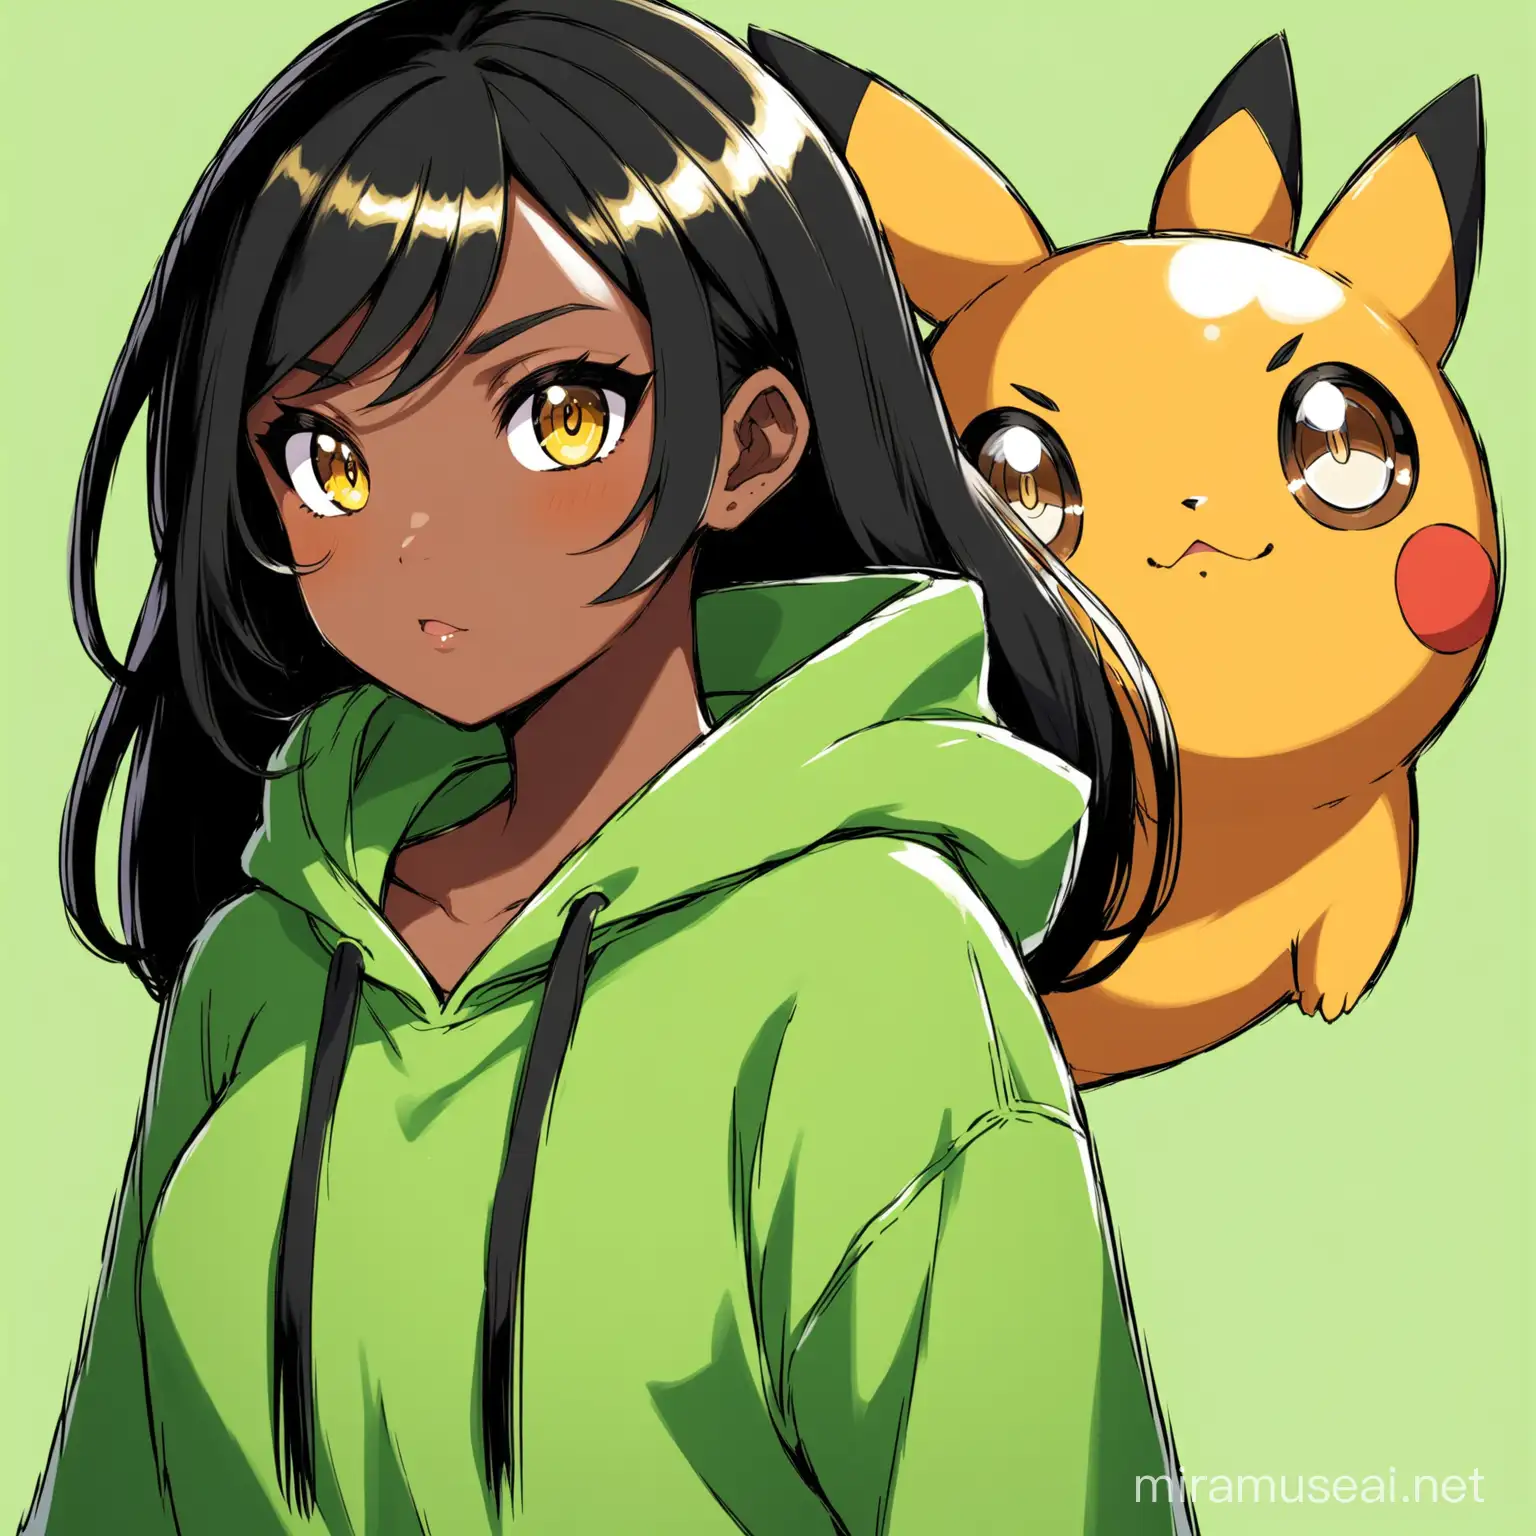 Pokemon Anime Style Black Girl with Golden Eyes in Green Hoodie